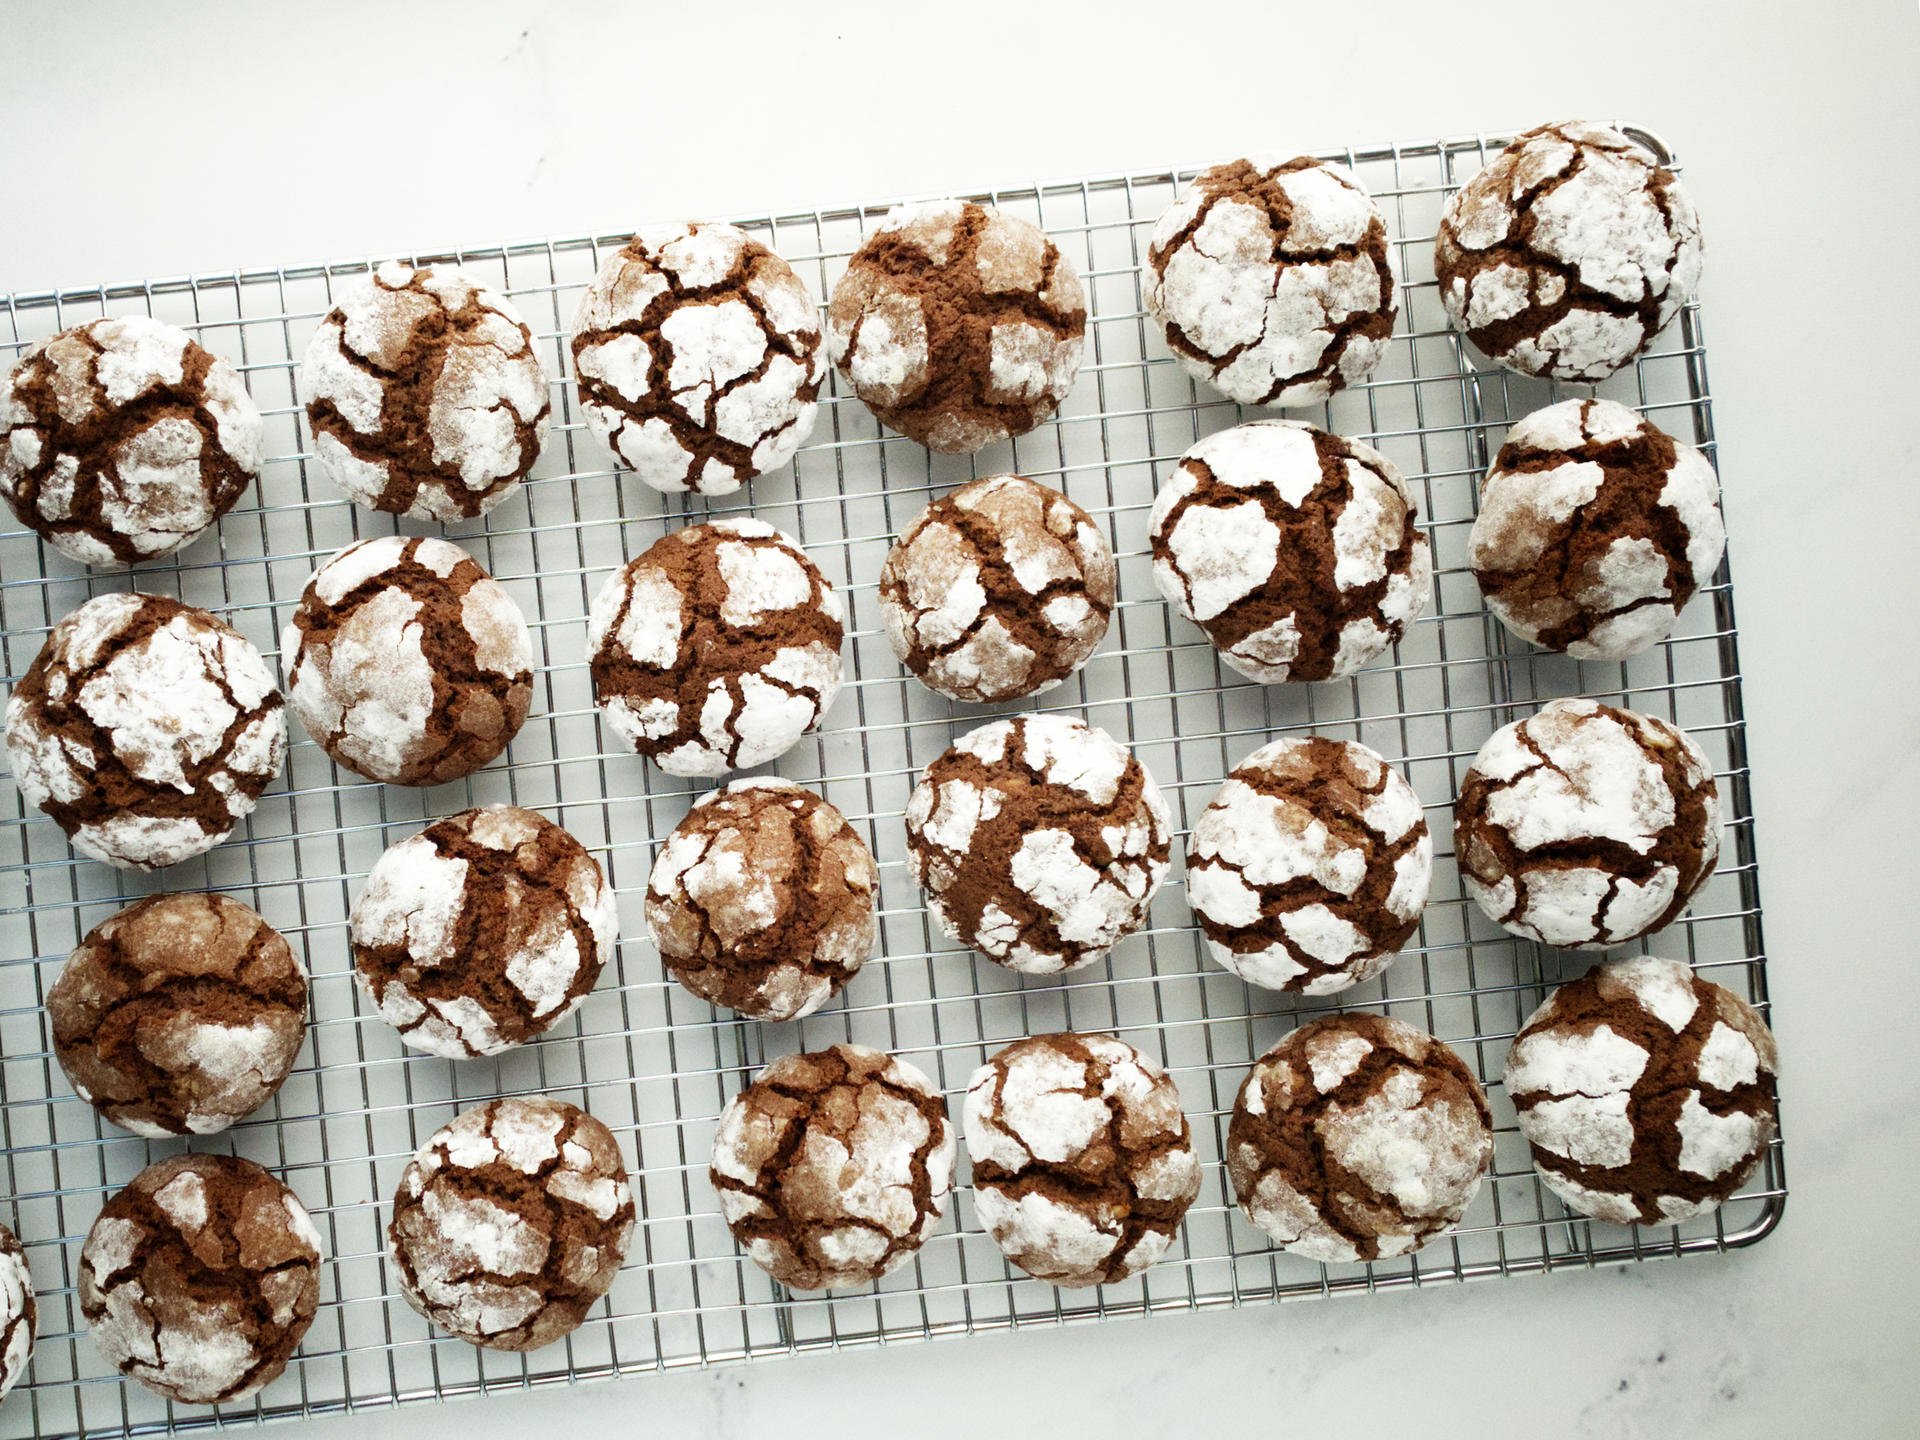 Chocolate Crackle Cookies on wire rack